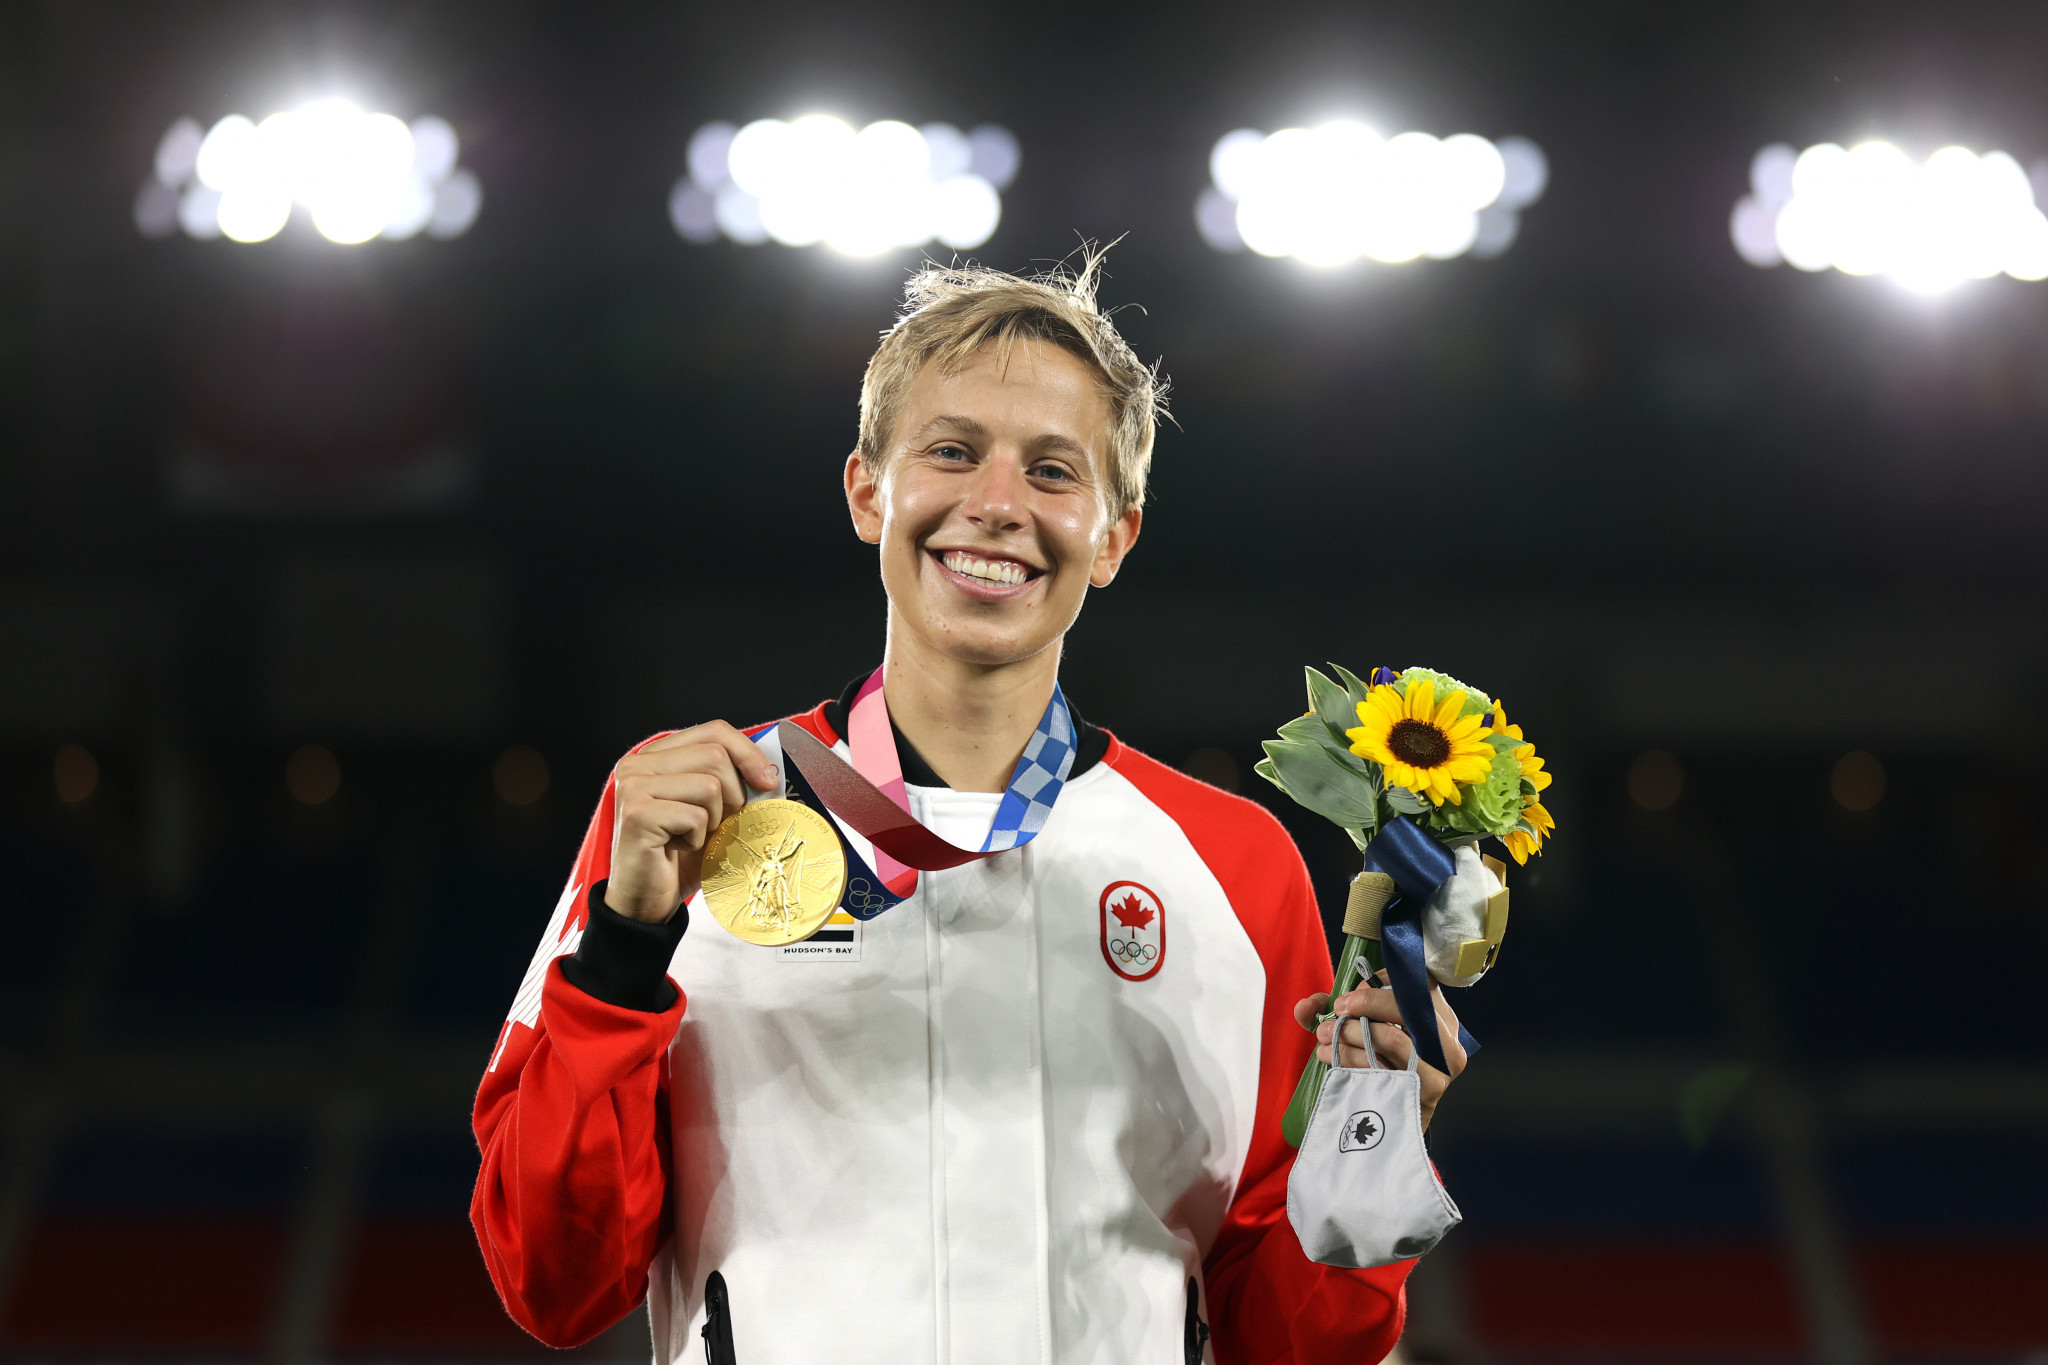 Quinn is the first openly non-binary transgender athlete to compete and win a gold medal at an Olympic Games ©Getty Images

